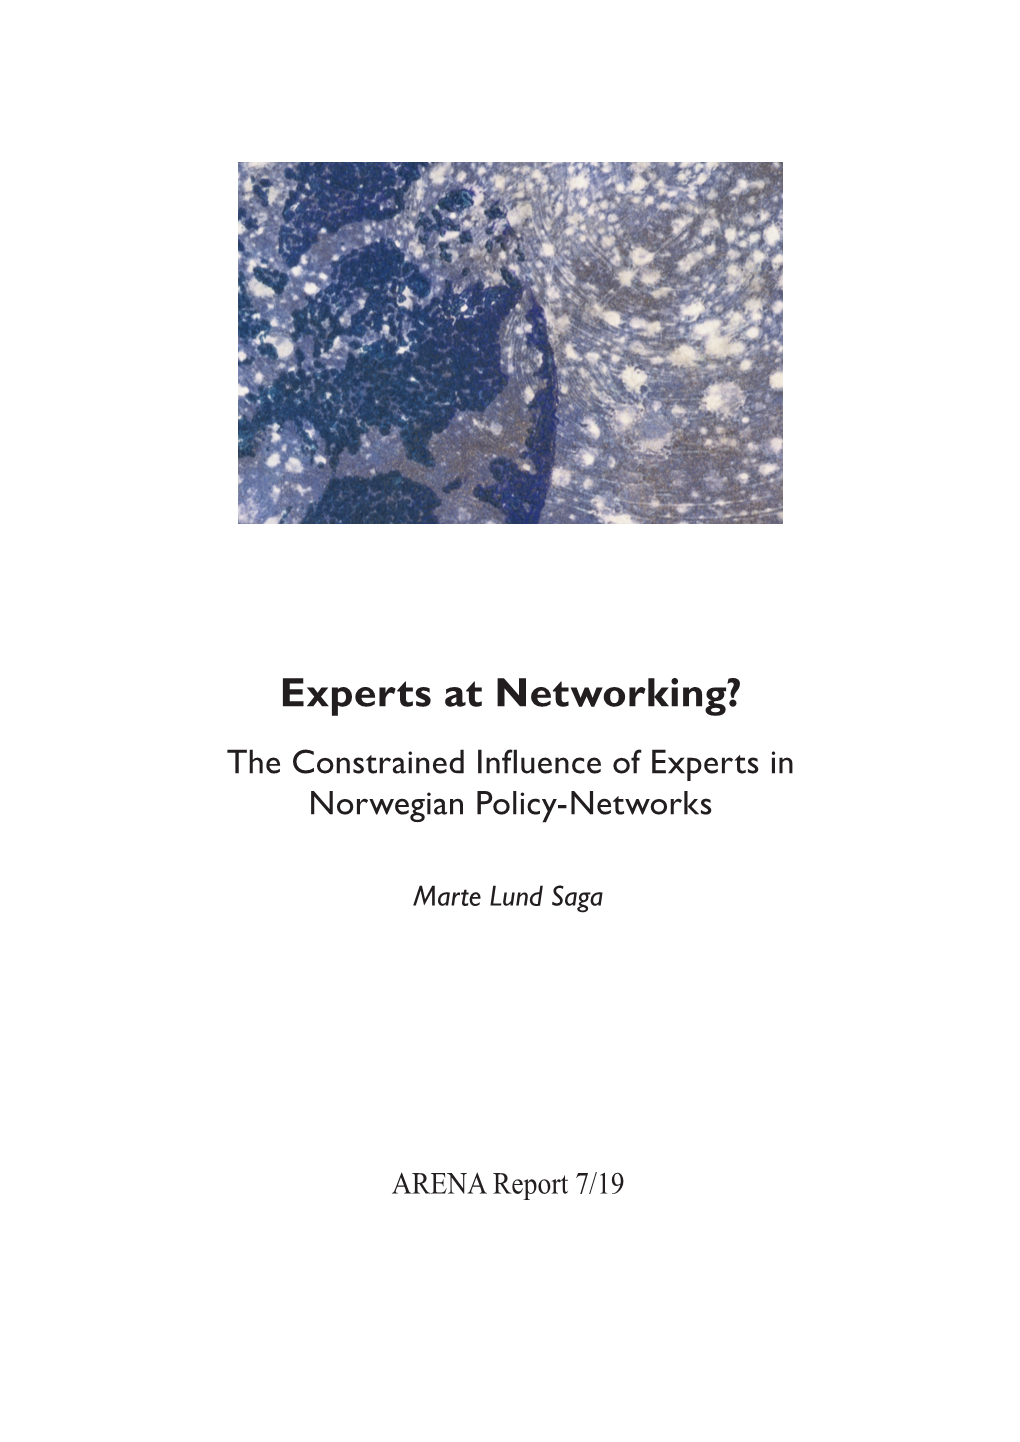 ARENA Report 7/19 Experts at Networking: the Constrained Influence of Experts in Norwegian Policy-Networks     